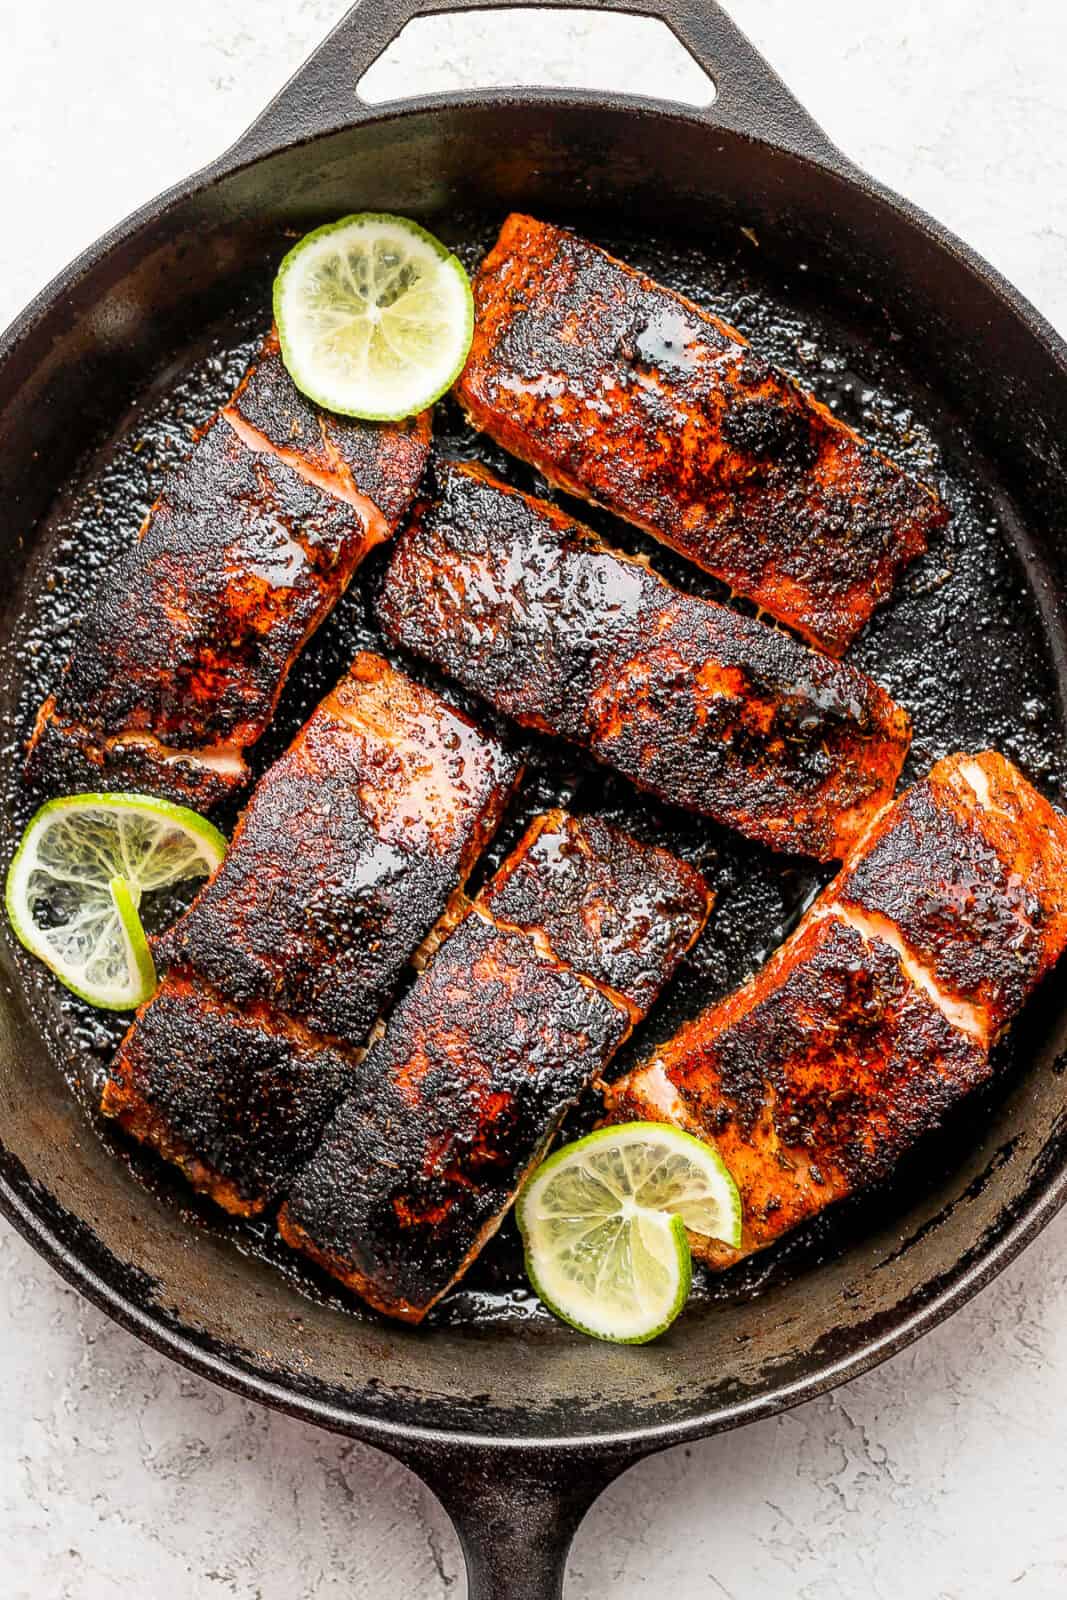 Fully cooked blackened salmon fillets.